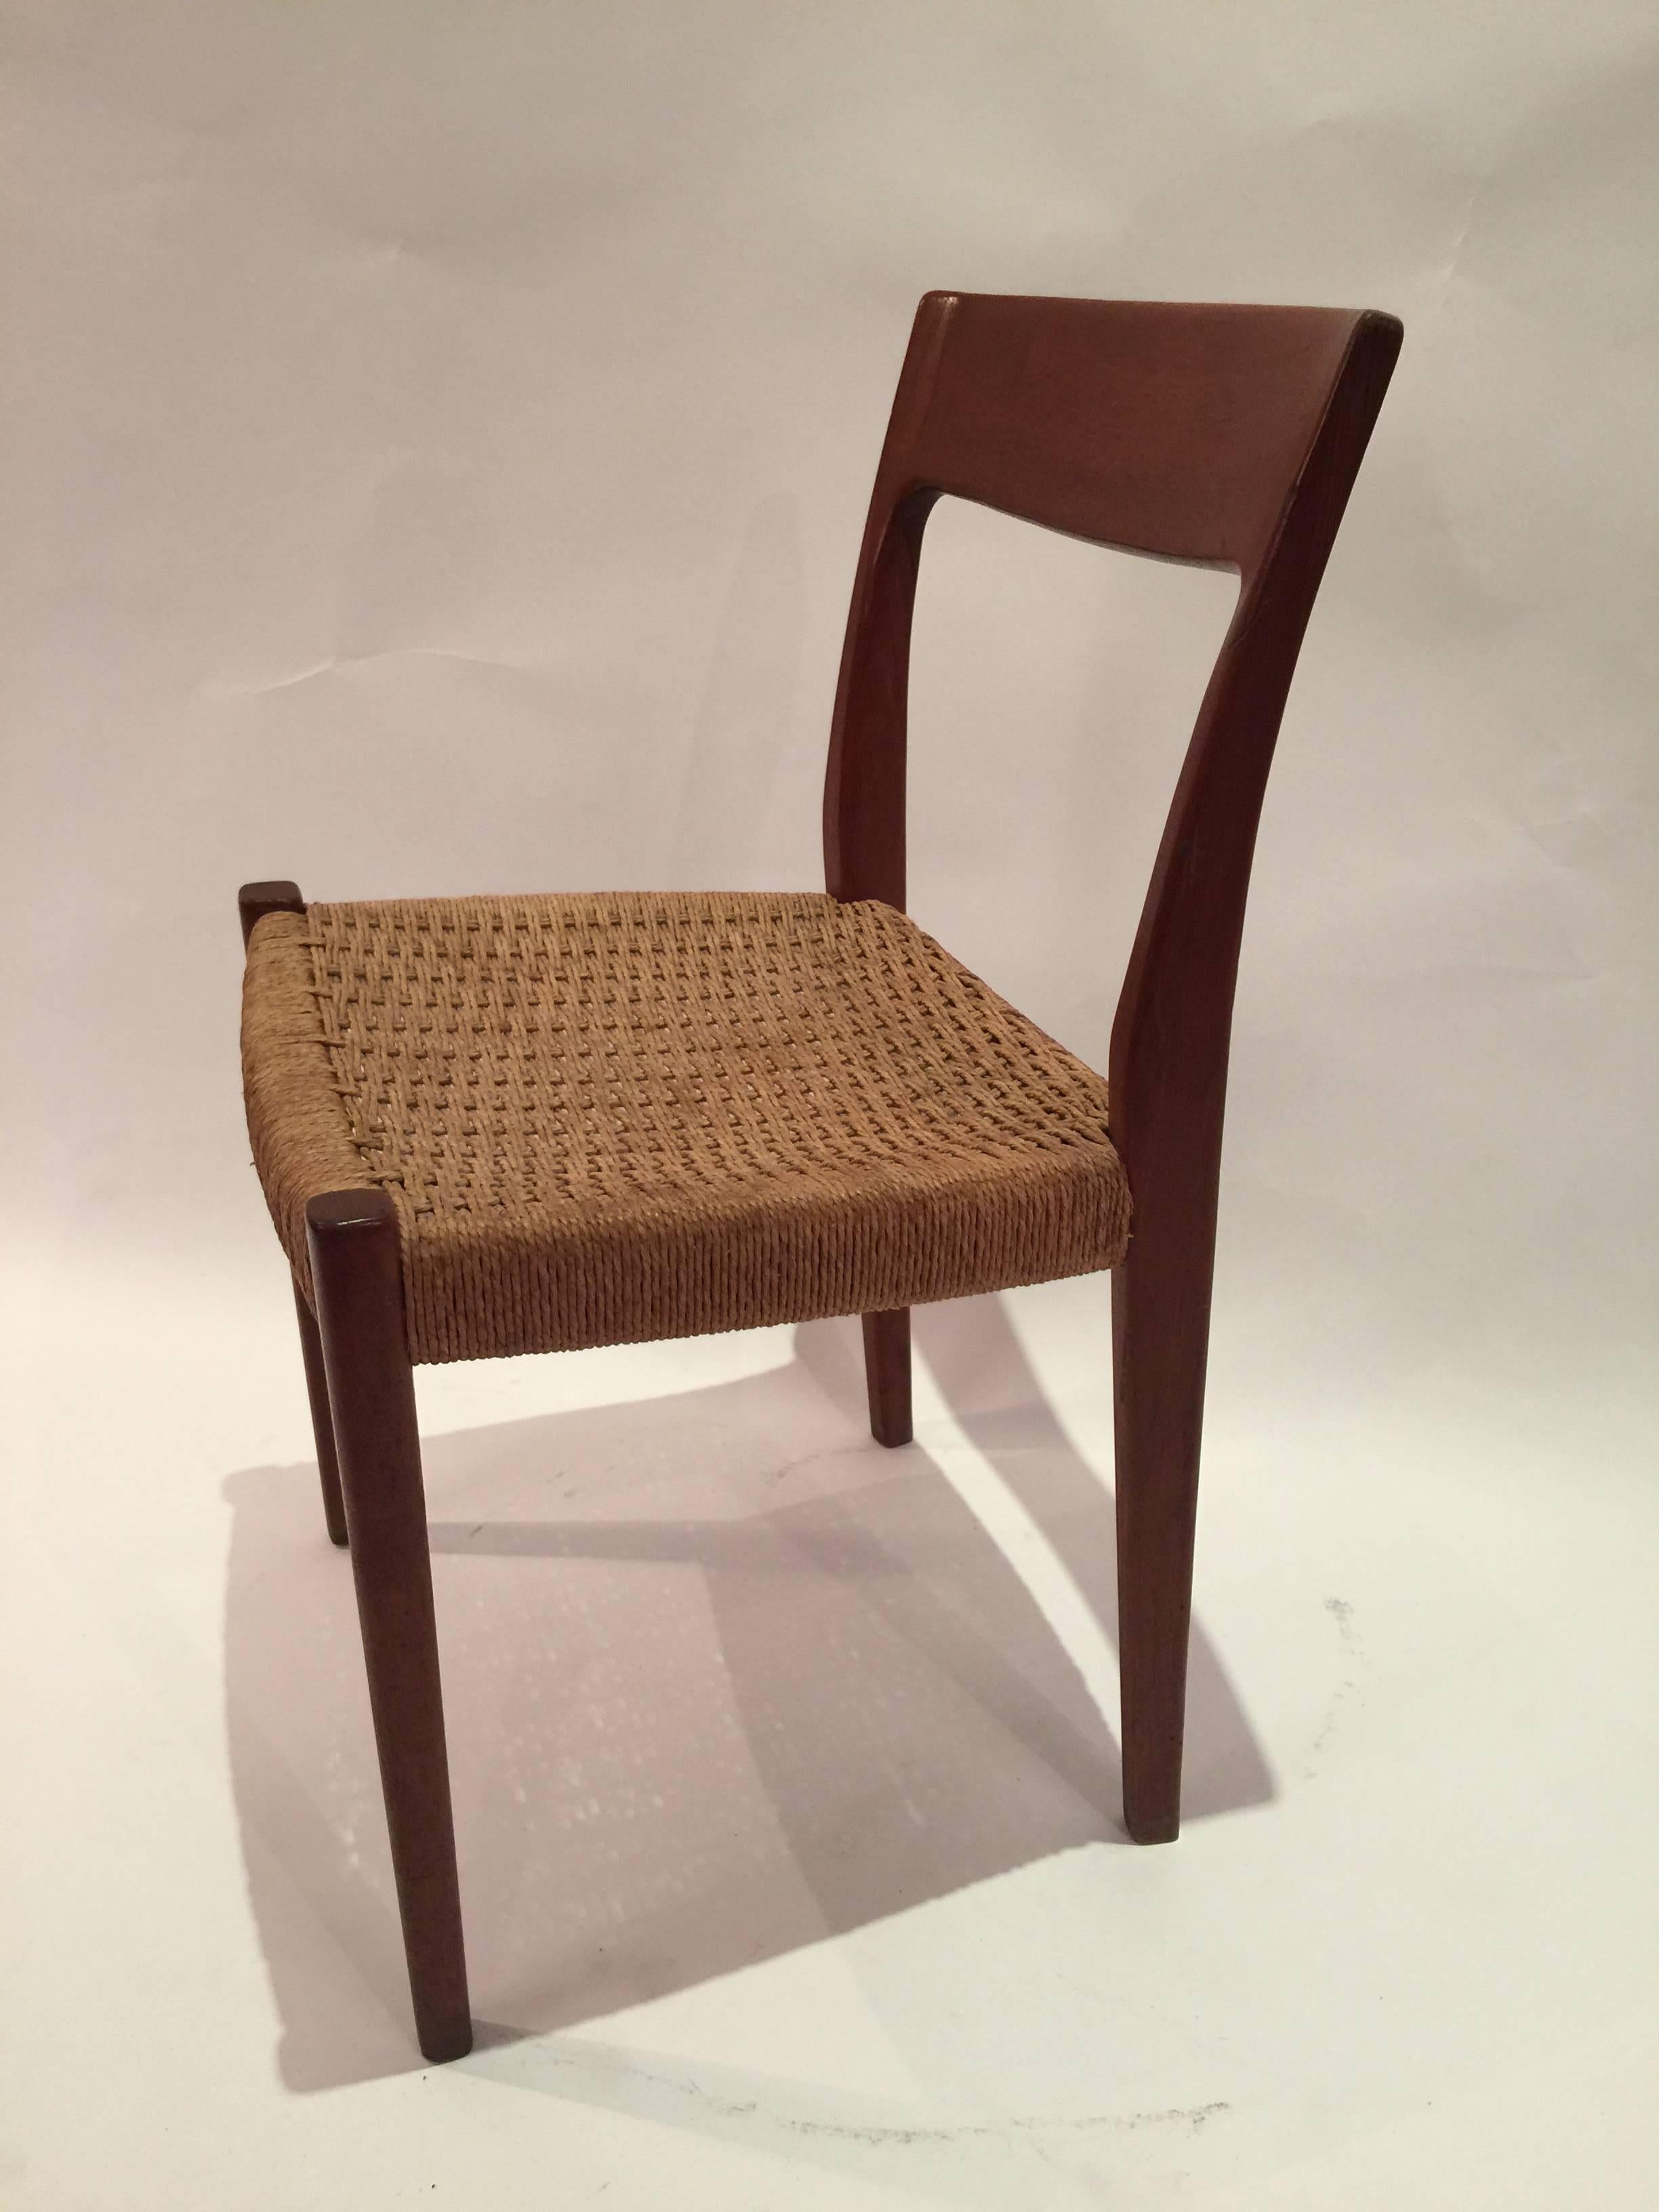 Beautiful Swedish teak chair with wooden cord seat. Made in Sweden by manufacturer Svegards.